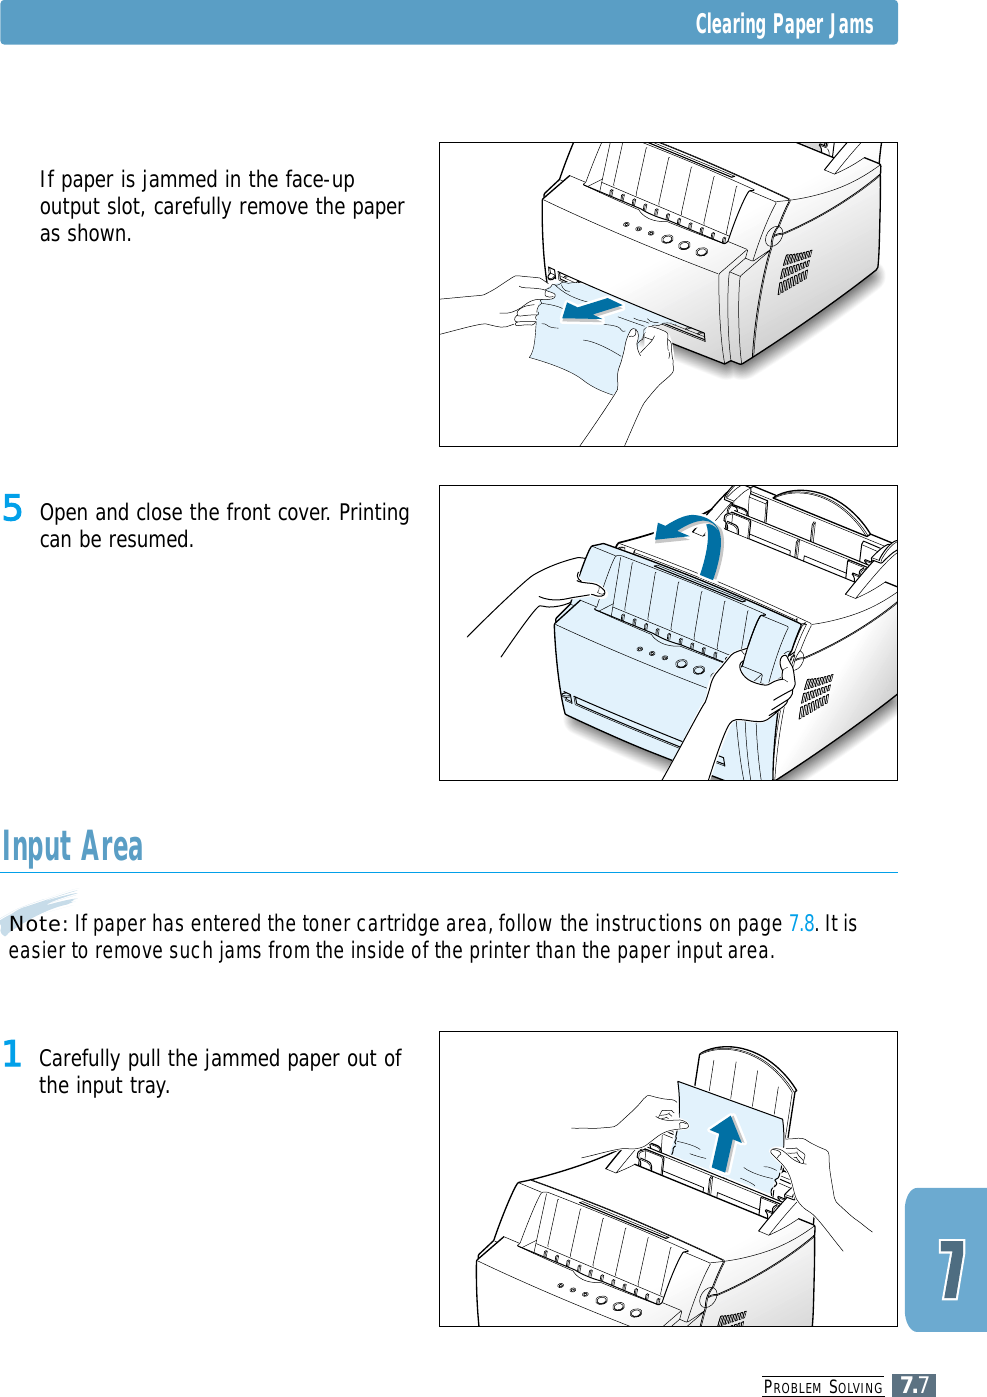 PROBLEM SOLVING7.7Note: If paper has entered the toner cartridge area, follow the instructions on page 7.8. It iseasier to remove such jams from the inside of the printer than the paper input area.Input Area1 Carefully pull the jammed paper out ofthe input tray.5 Open and close the front cover. Printingcan be resumed.5 If paper is jammed in the face-upoutput slot, carefully remove the paperas shown.Clearing Paper Jams